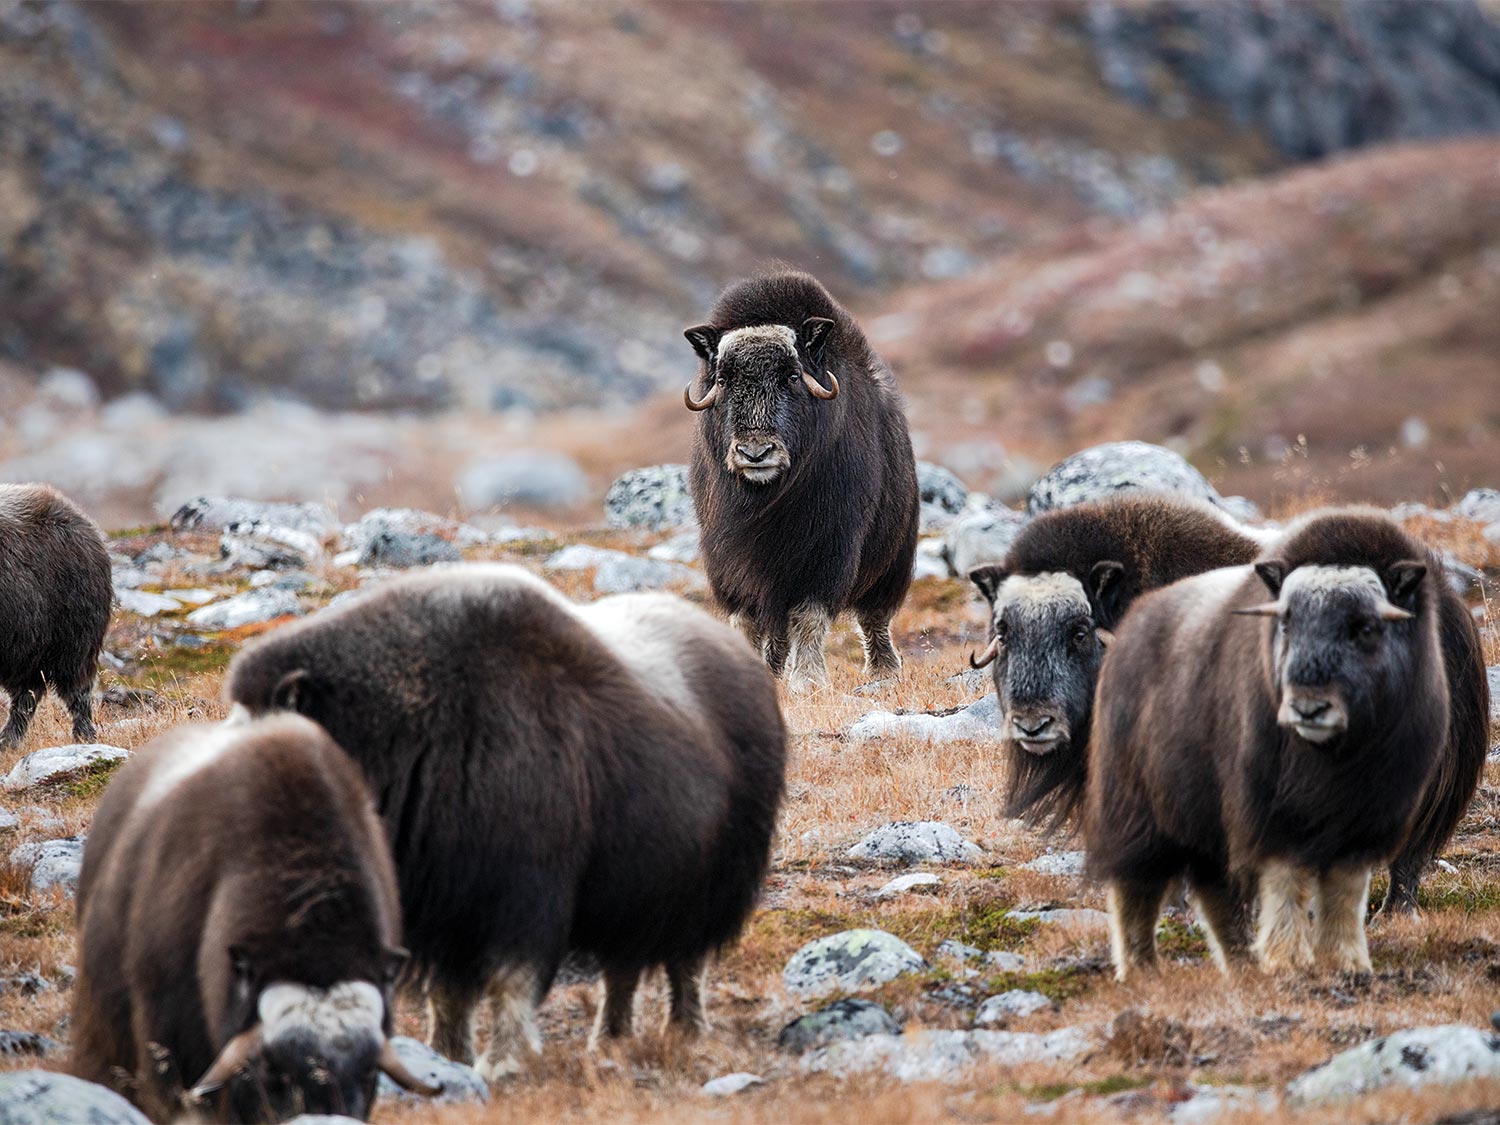 A musk ox bull in a herd of oxen.